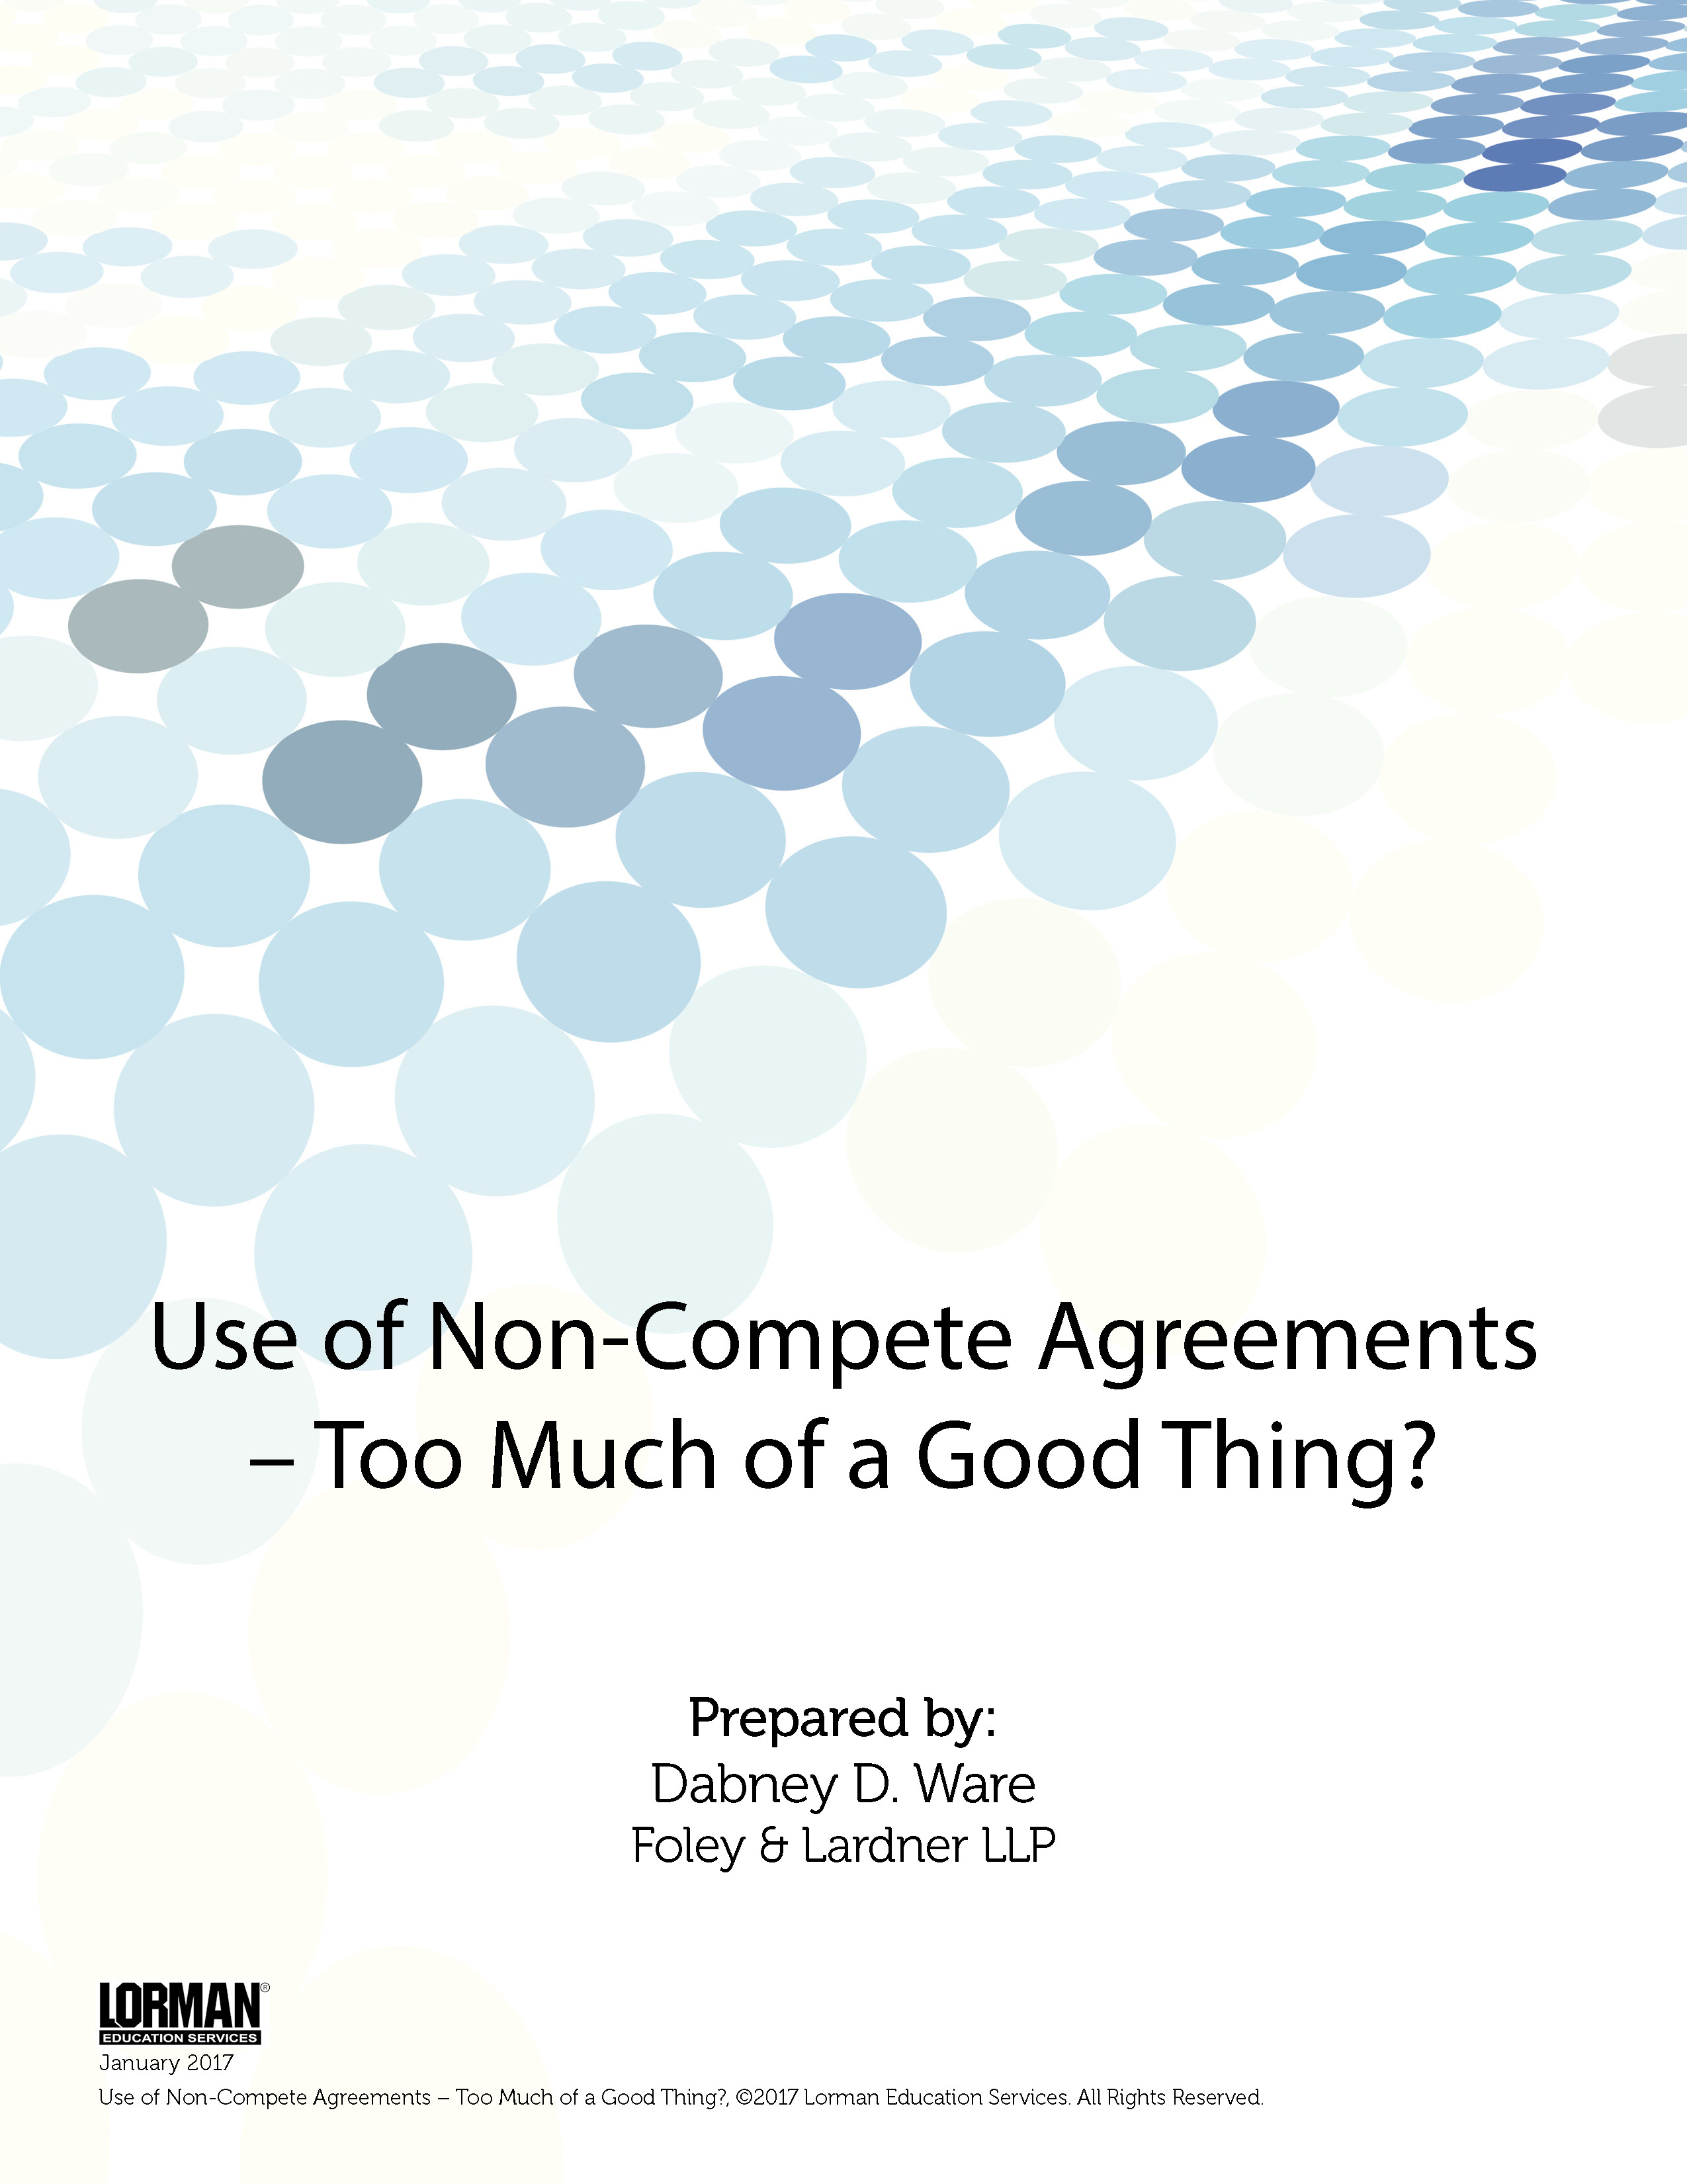 Use of Non-Compete Agreements - Too Much of a Good Thing